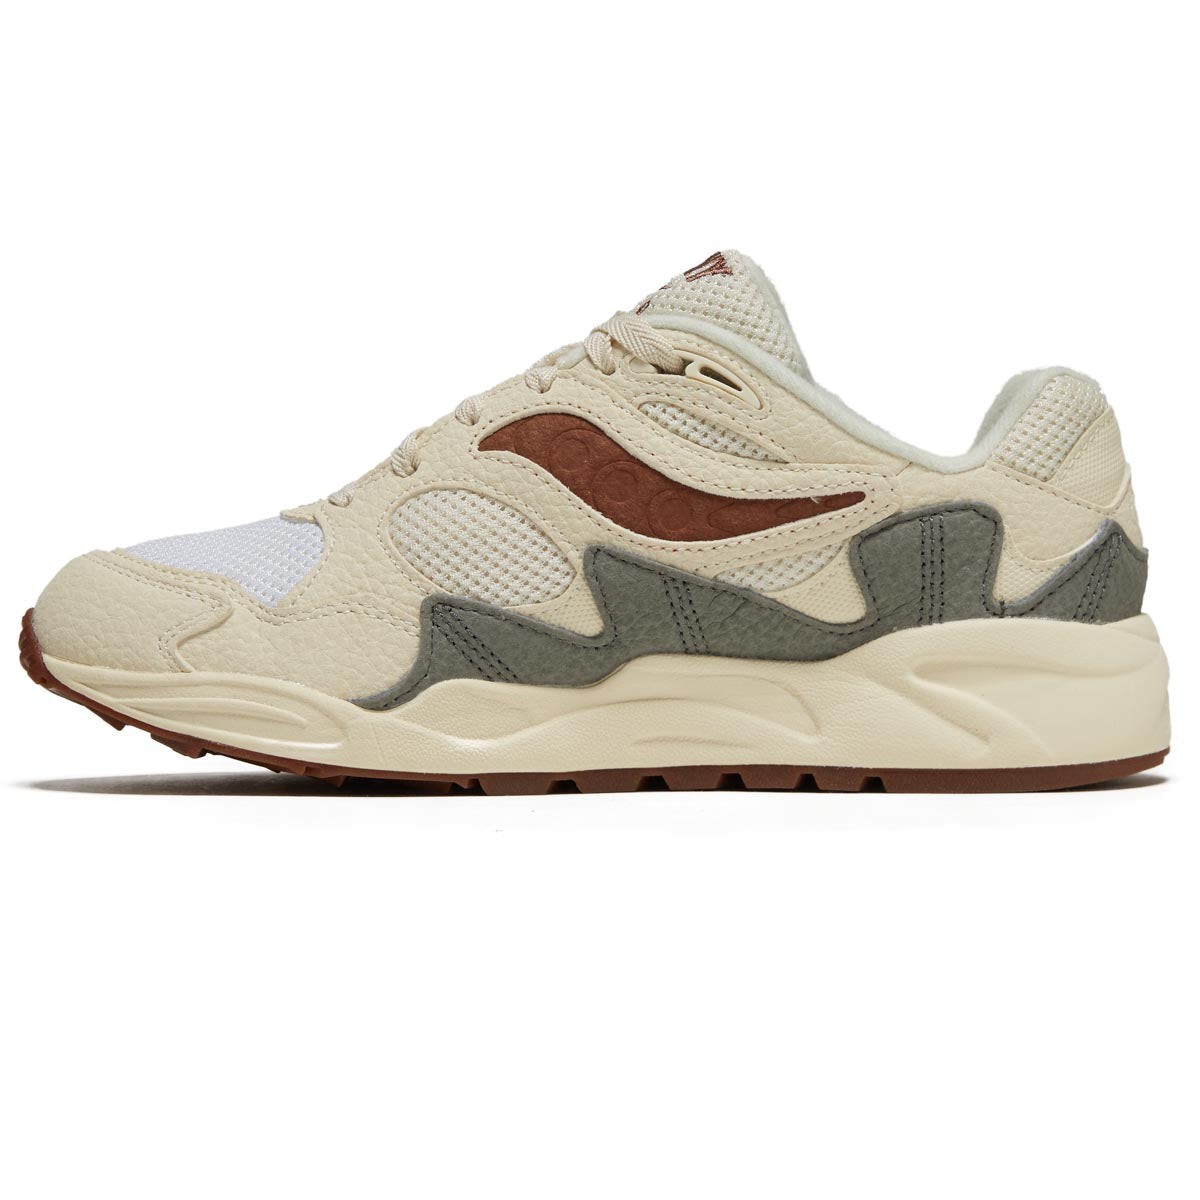 Saucony Grid Shadow 2 Shoes - Sand/Brown image 2